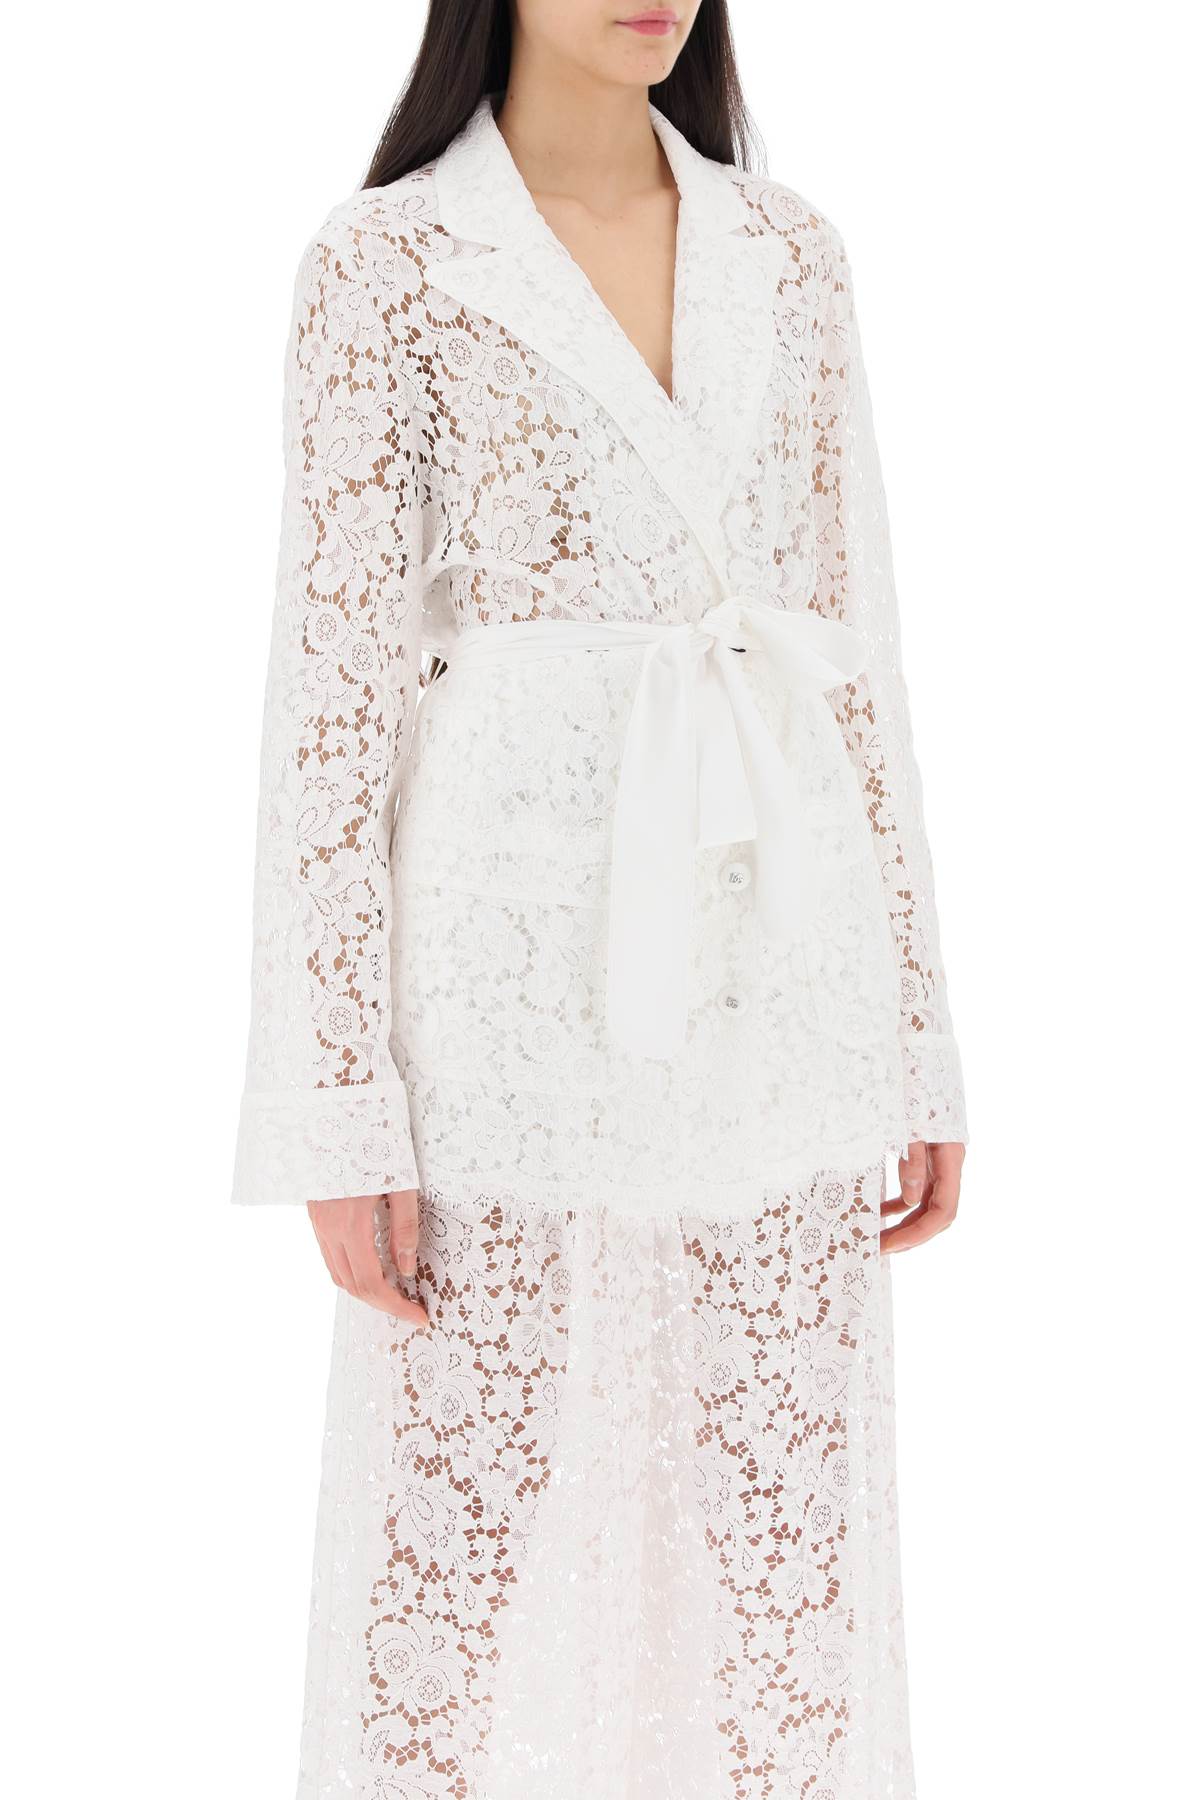 Shop Dolce & Gabbana White Lace Jacket With Waist Belt And Lapel Collar